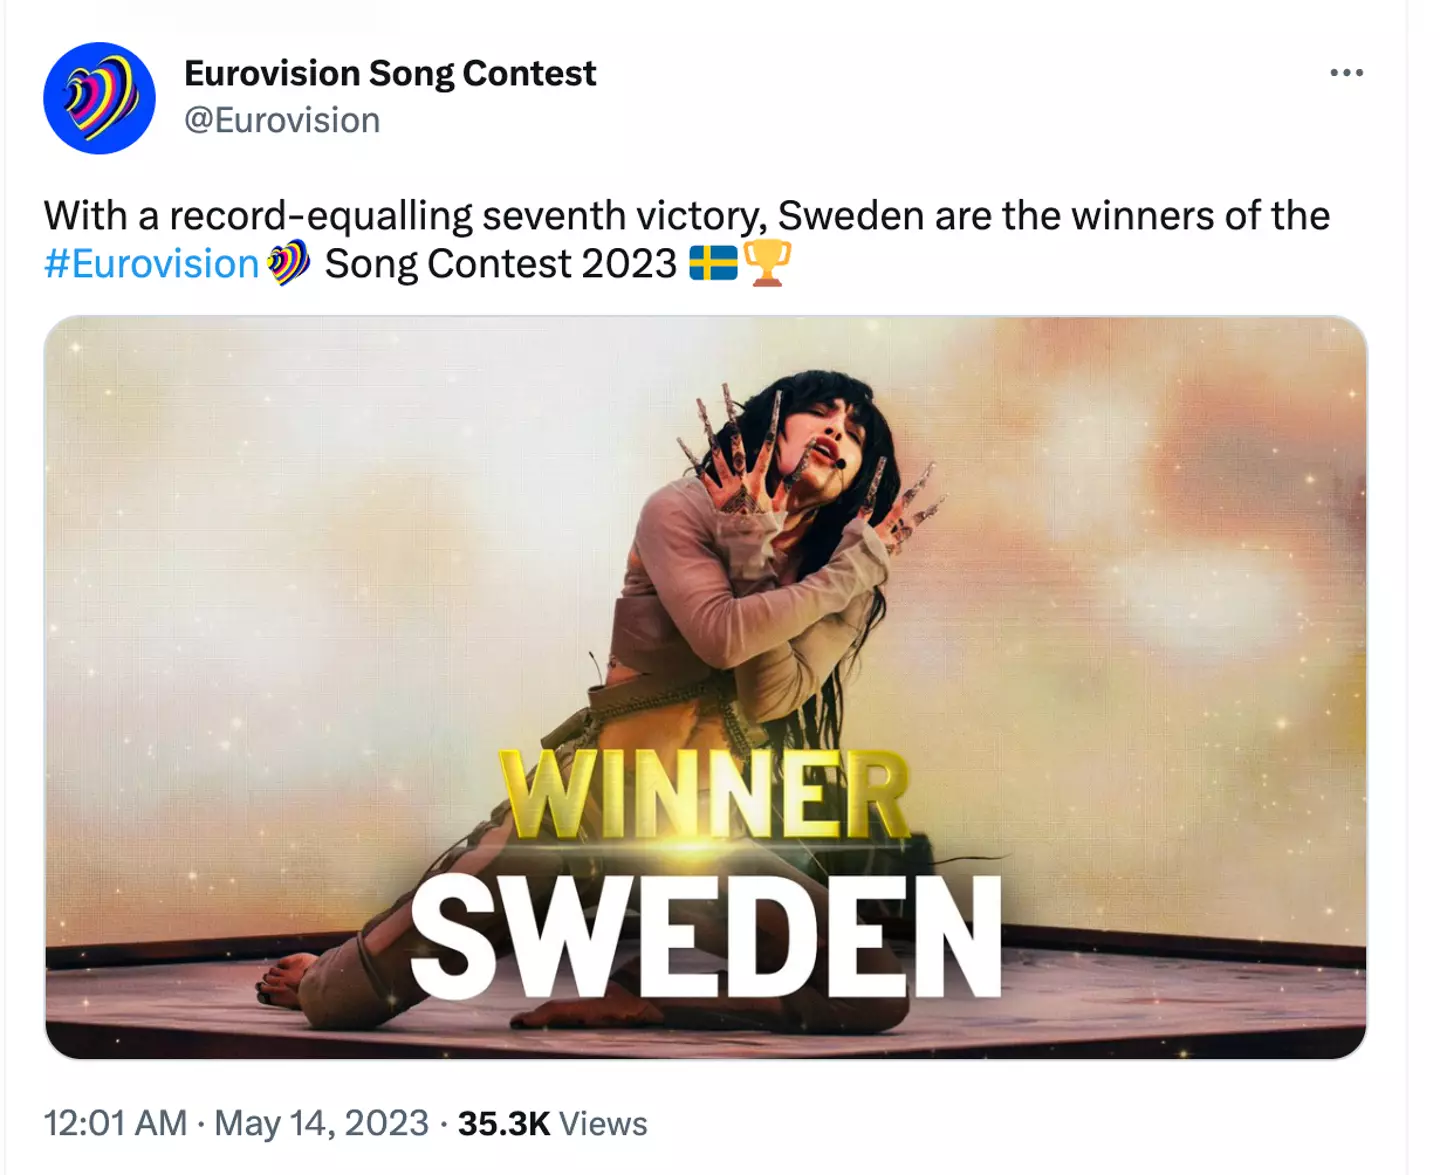 Sweden charged ahead after votes from viewers.